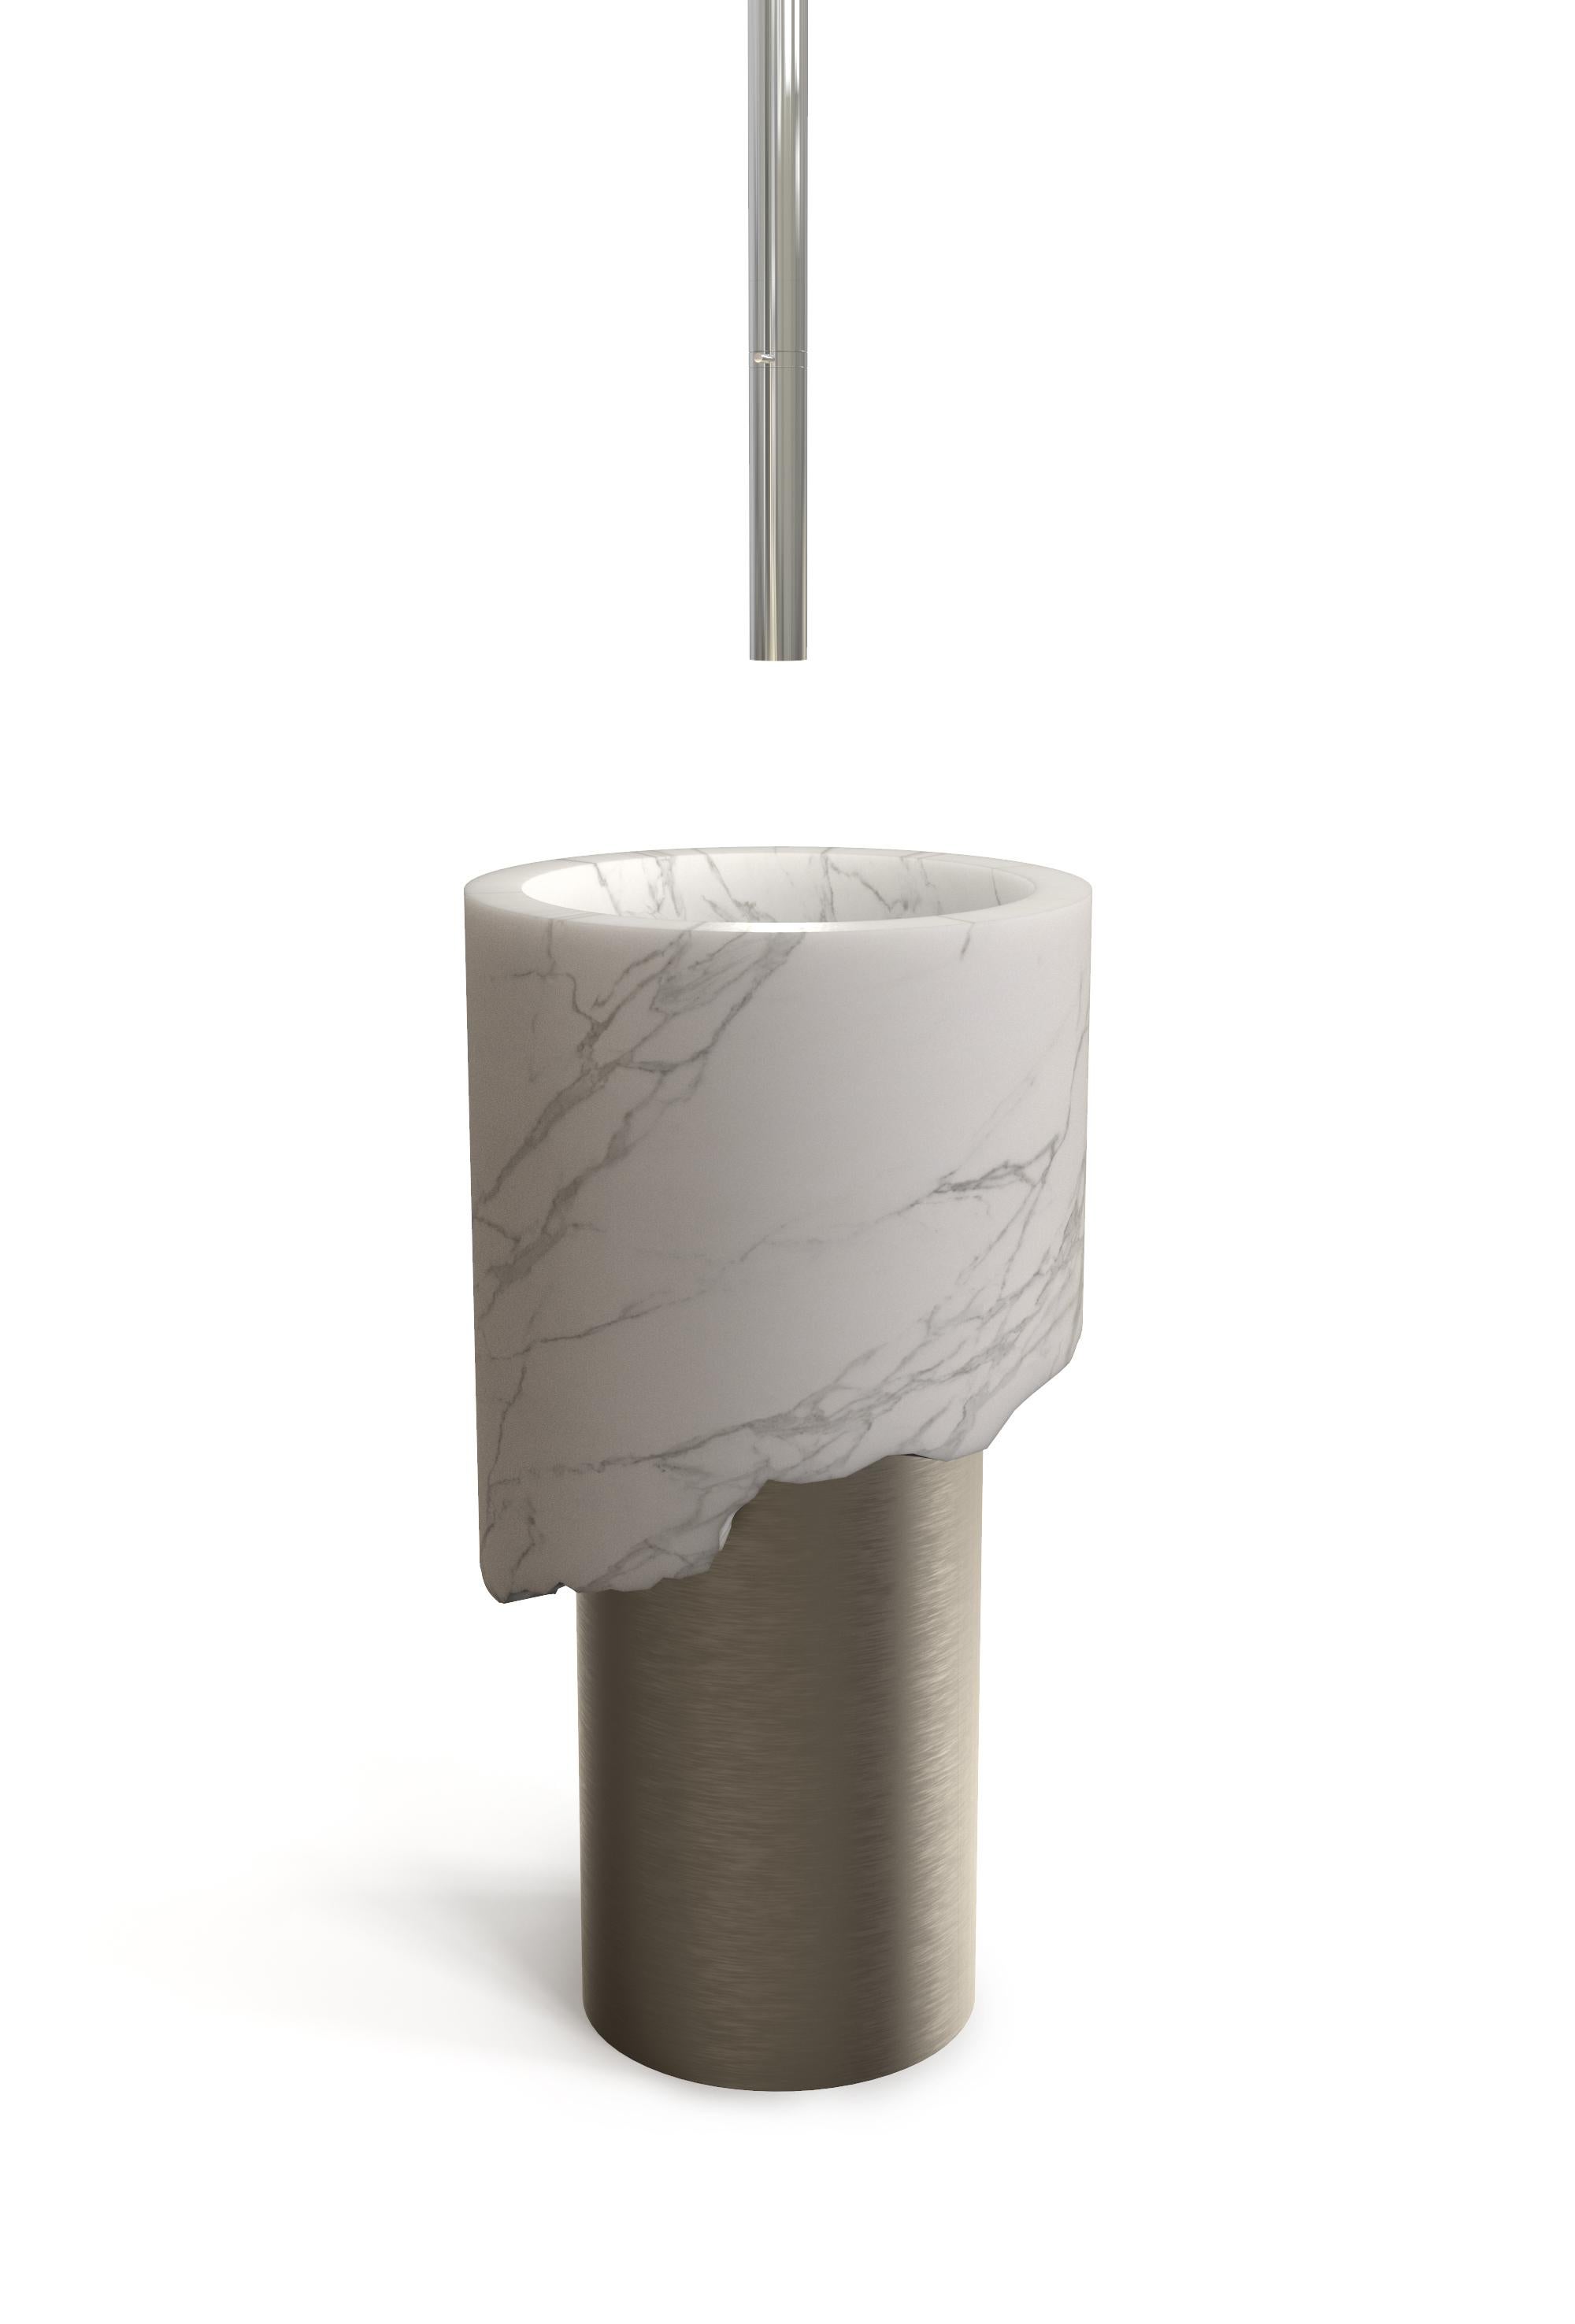 Boris washbasin by Marmi Serafini
Materials: Calcatta marble, bronze.
Dimensions: D 44 x H 85 cm
Available in other marbles and metals.
Tap not included.

Sculptural design, organic proportions and strong balance between materials.
These are